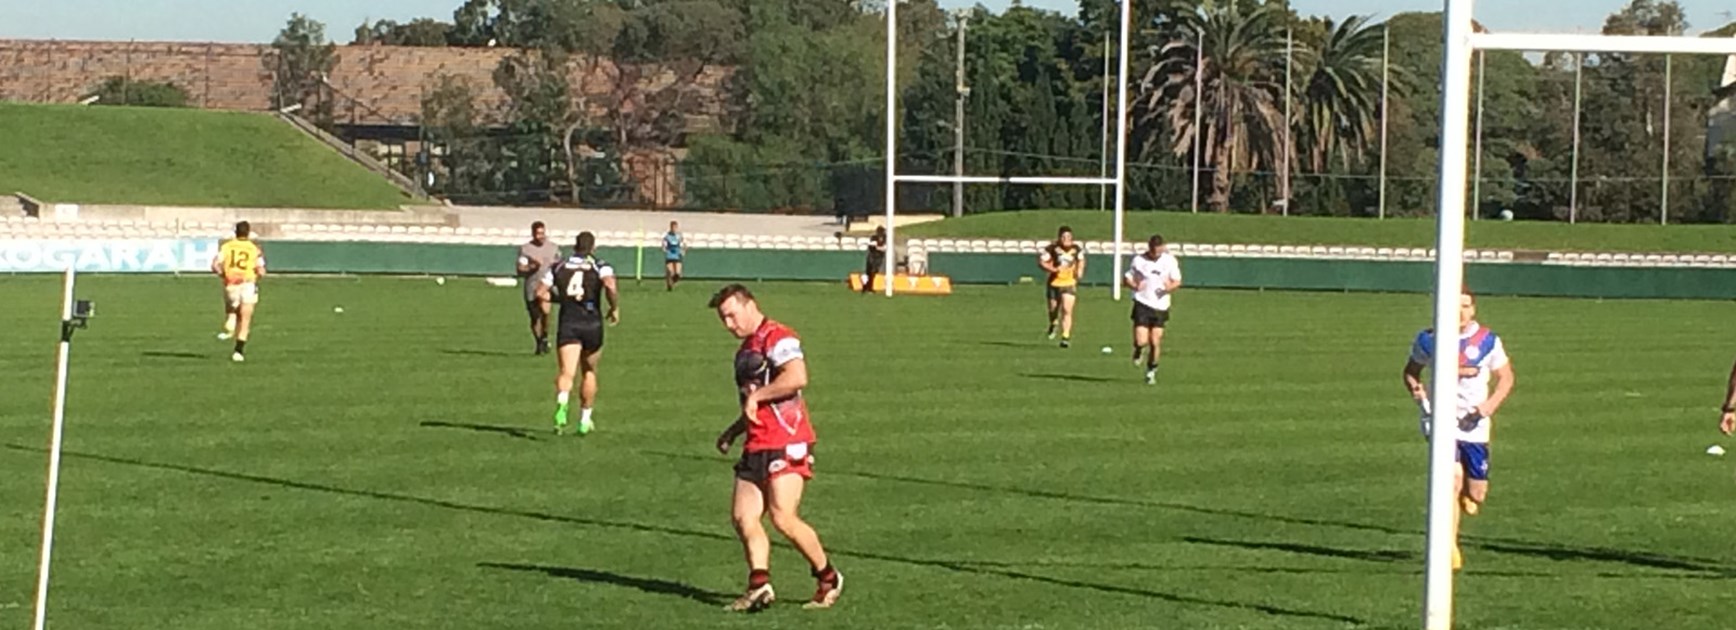 The NRL Rookie candidates are put through 100 metre sprinting drills.